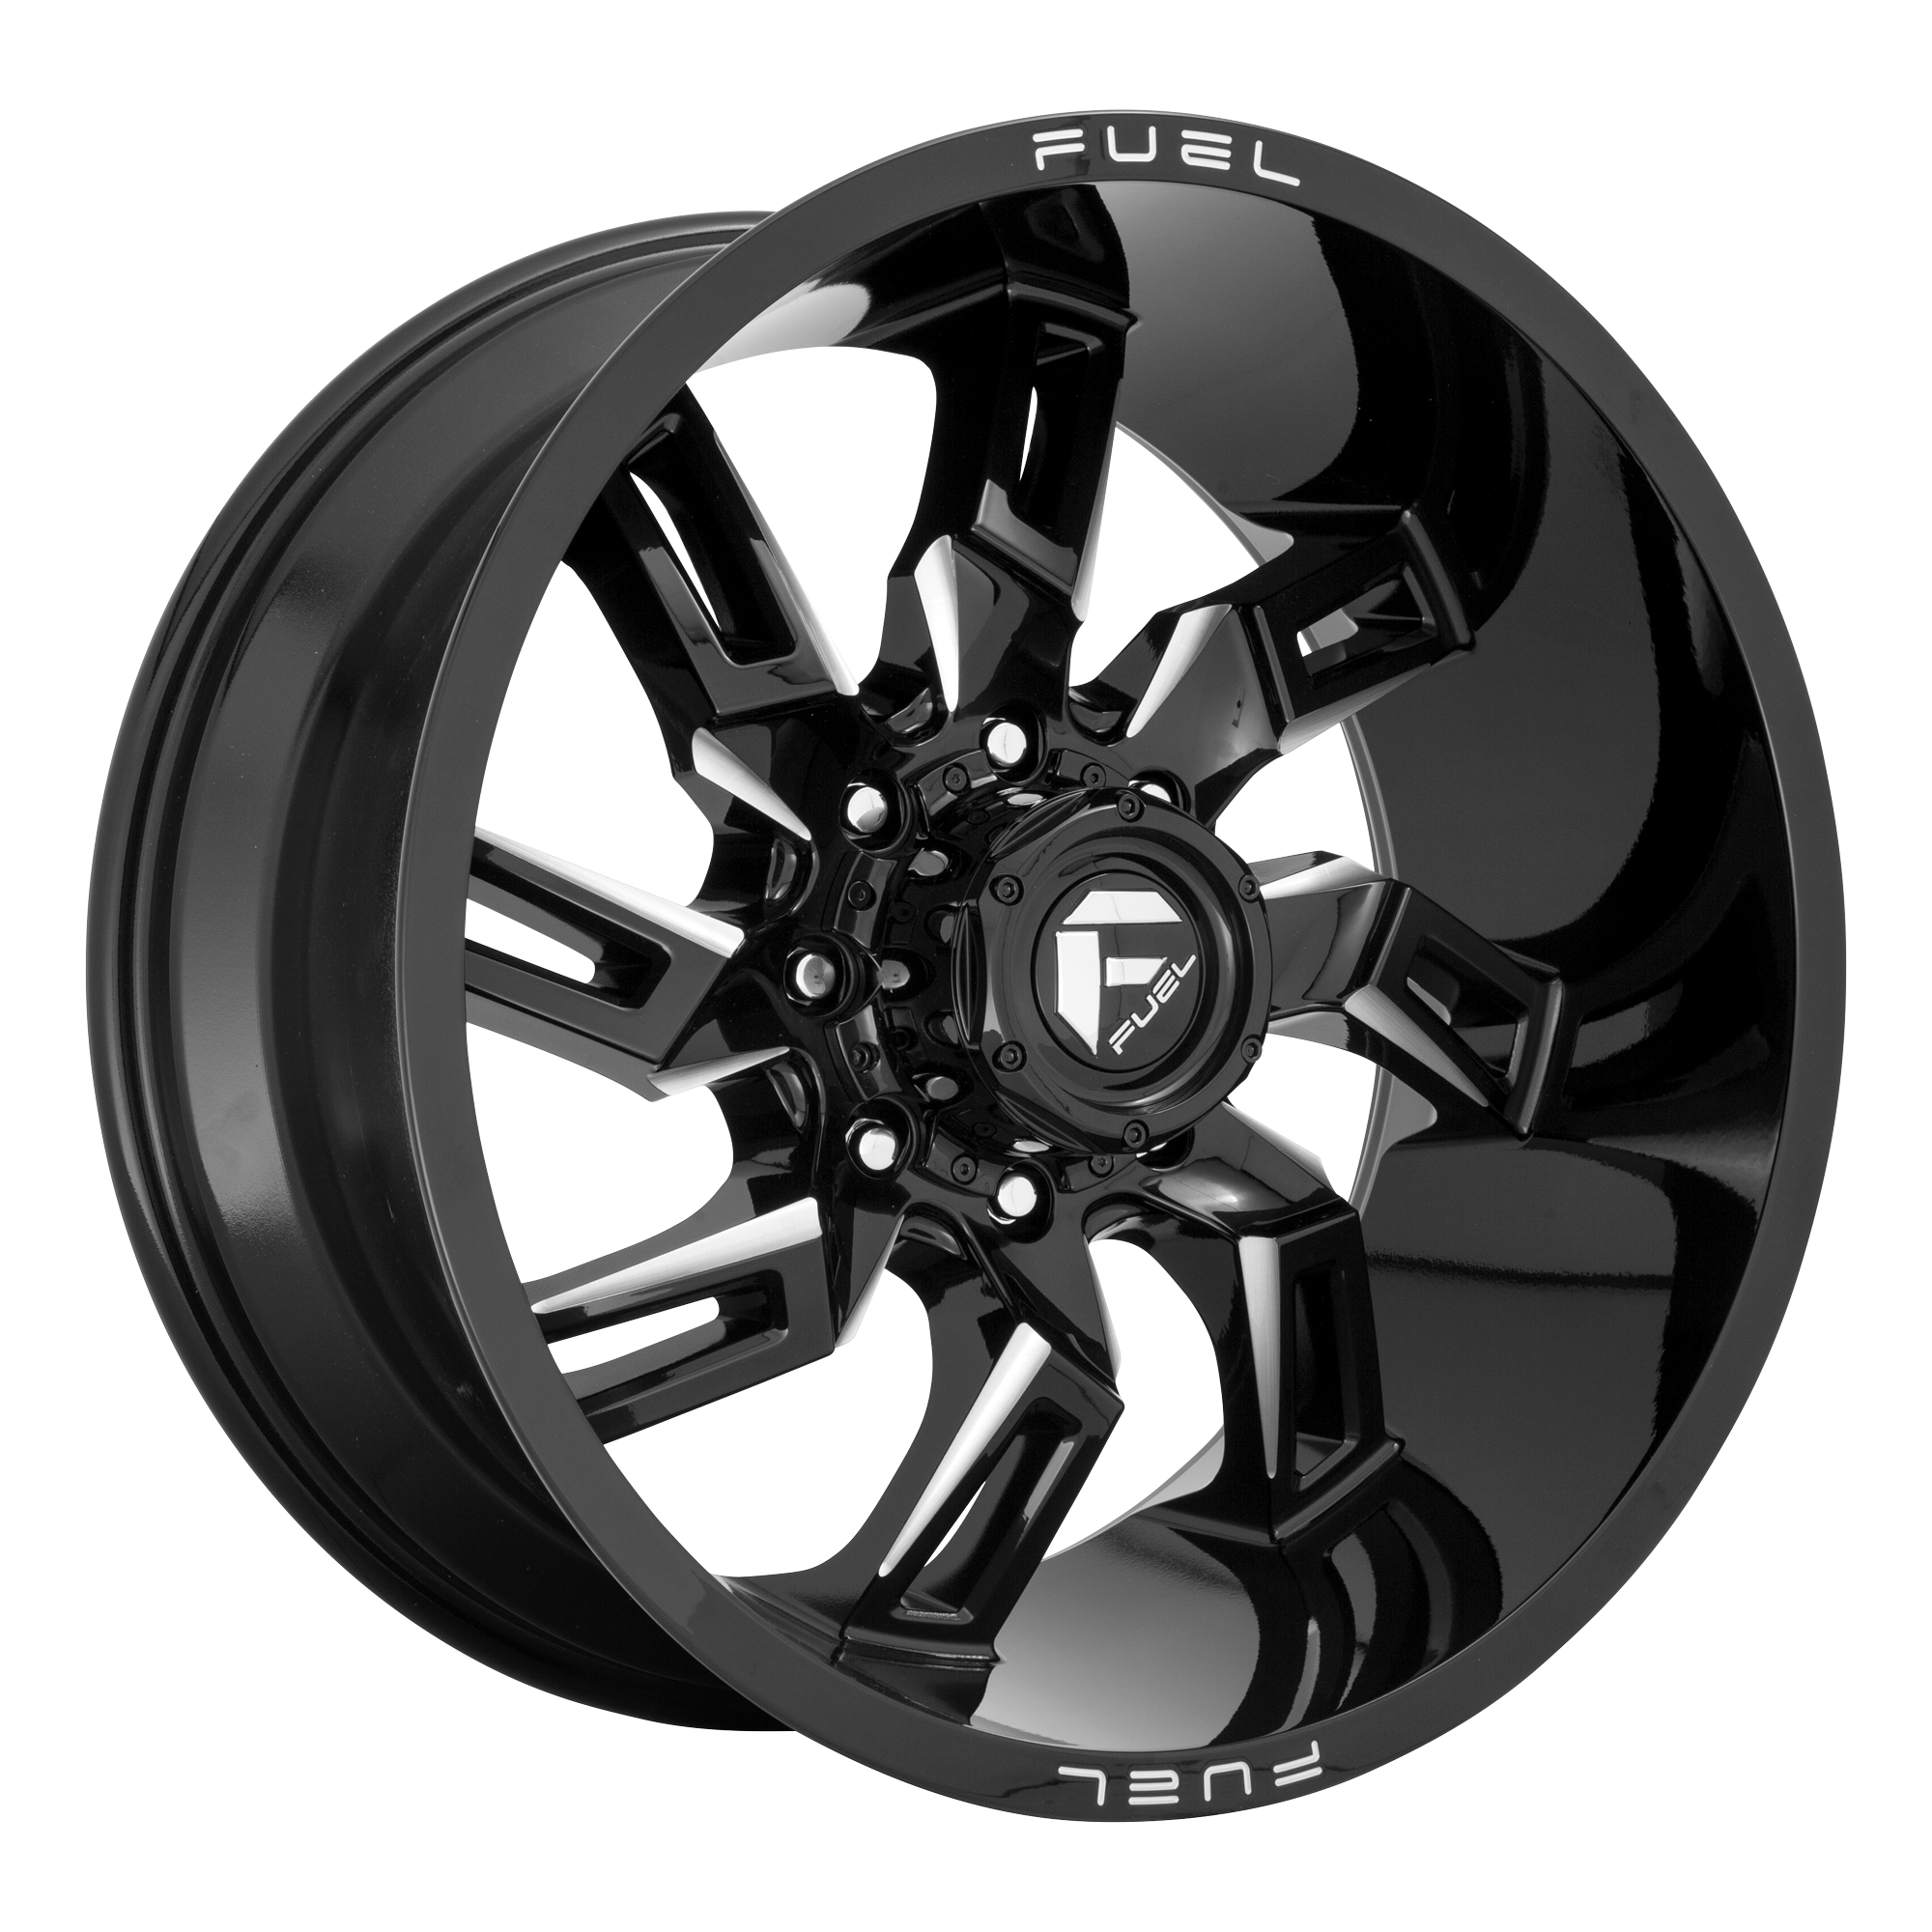 LOCKDOWN 20x9 8x165.10 GLOSS BLACK MILLED (1 mm) - Tires and Engine Performance